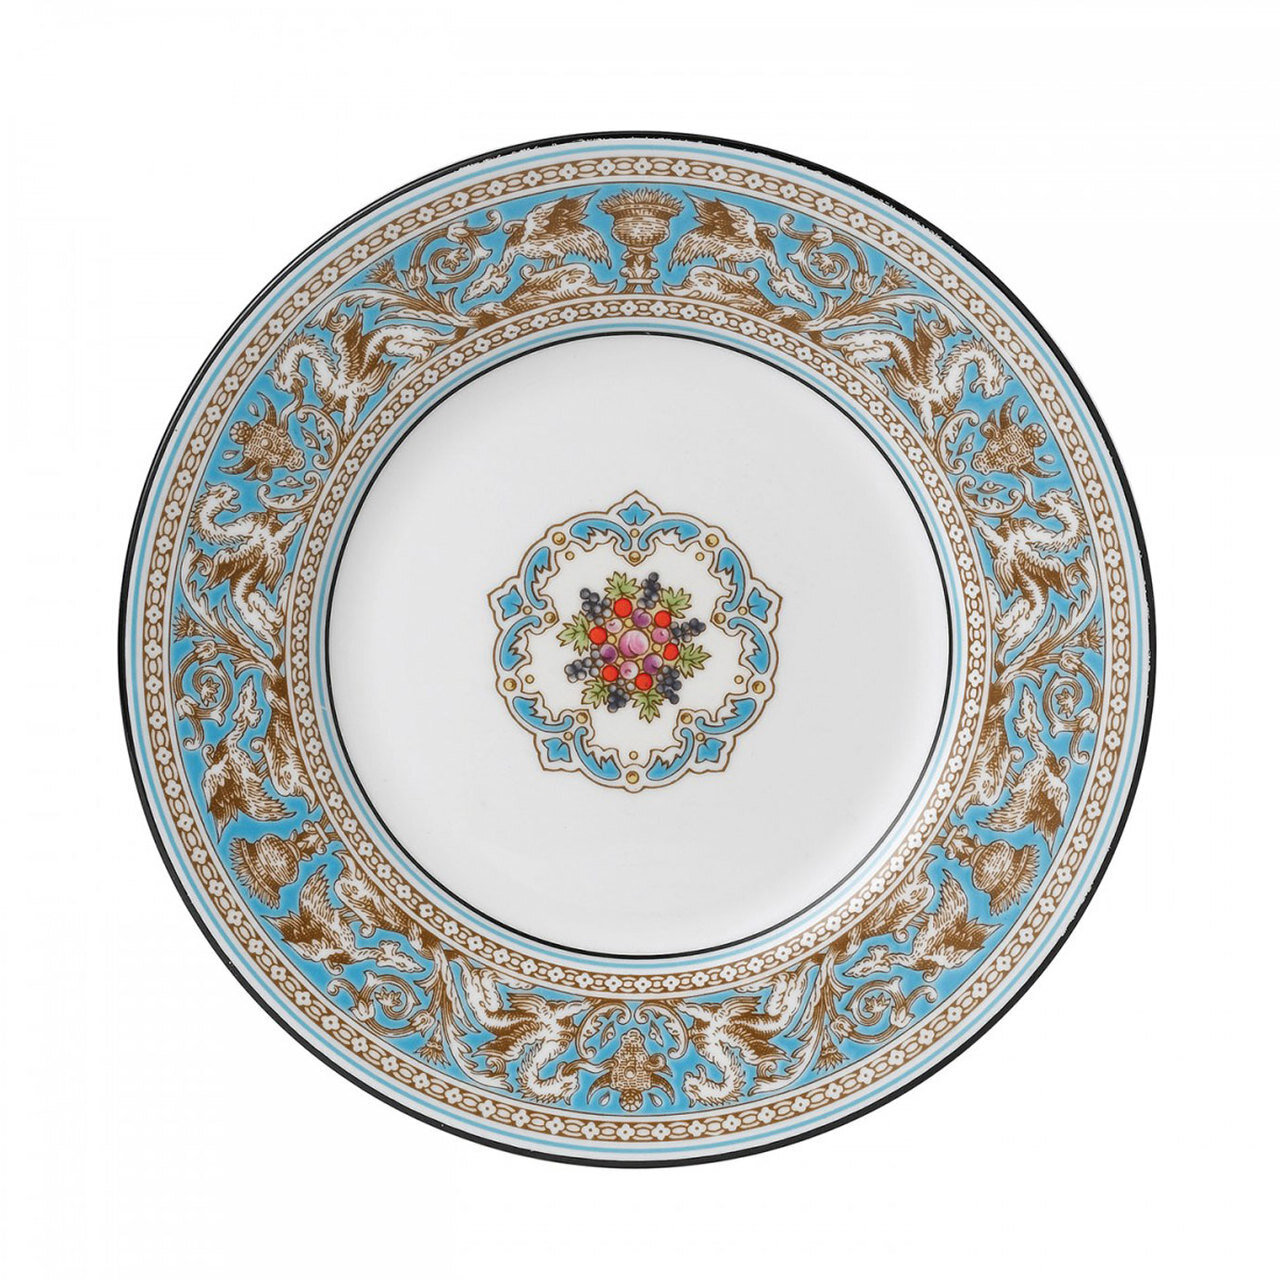 Wedgwood Florentine Turquoise Bread and Butter Plate 7 Inch